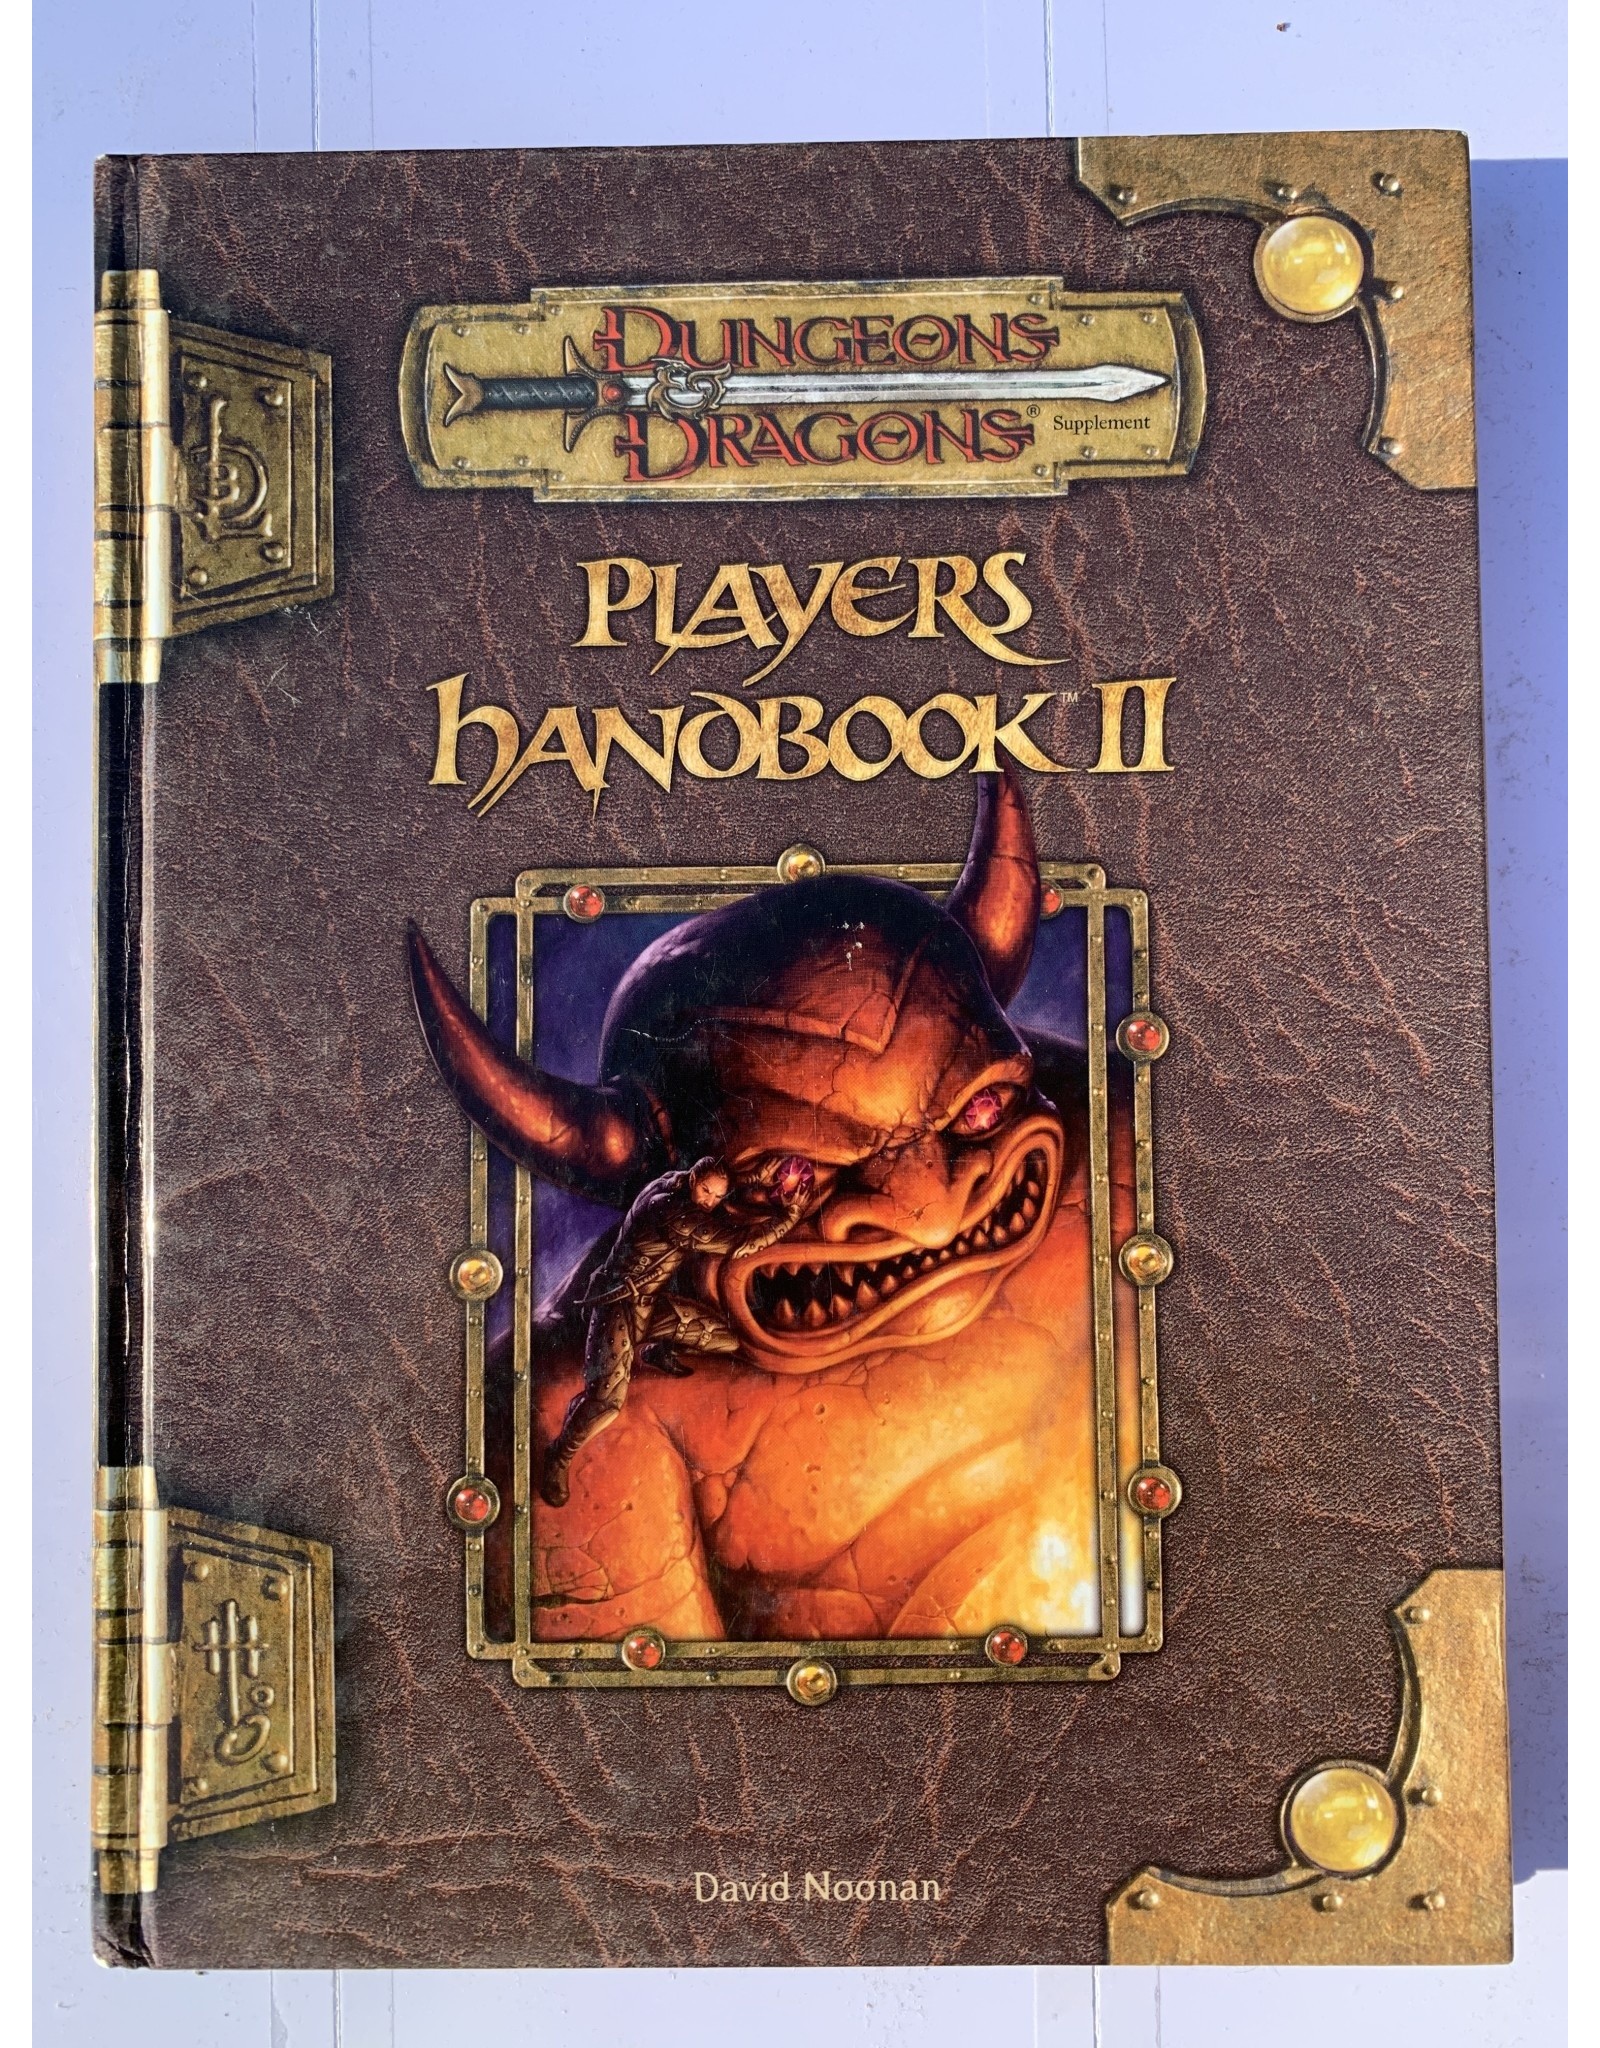 Wizards of the Coast Dungeons & Dragons (3.5 Edition) - Players Handbook II (2001)